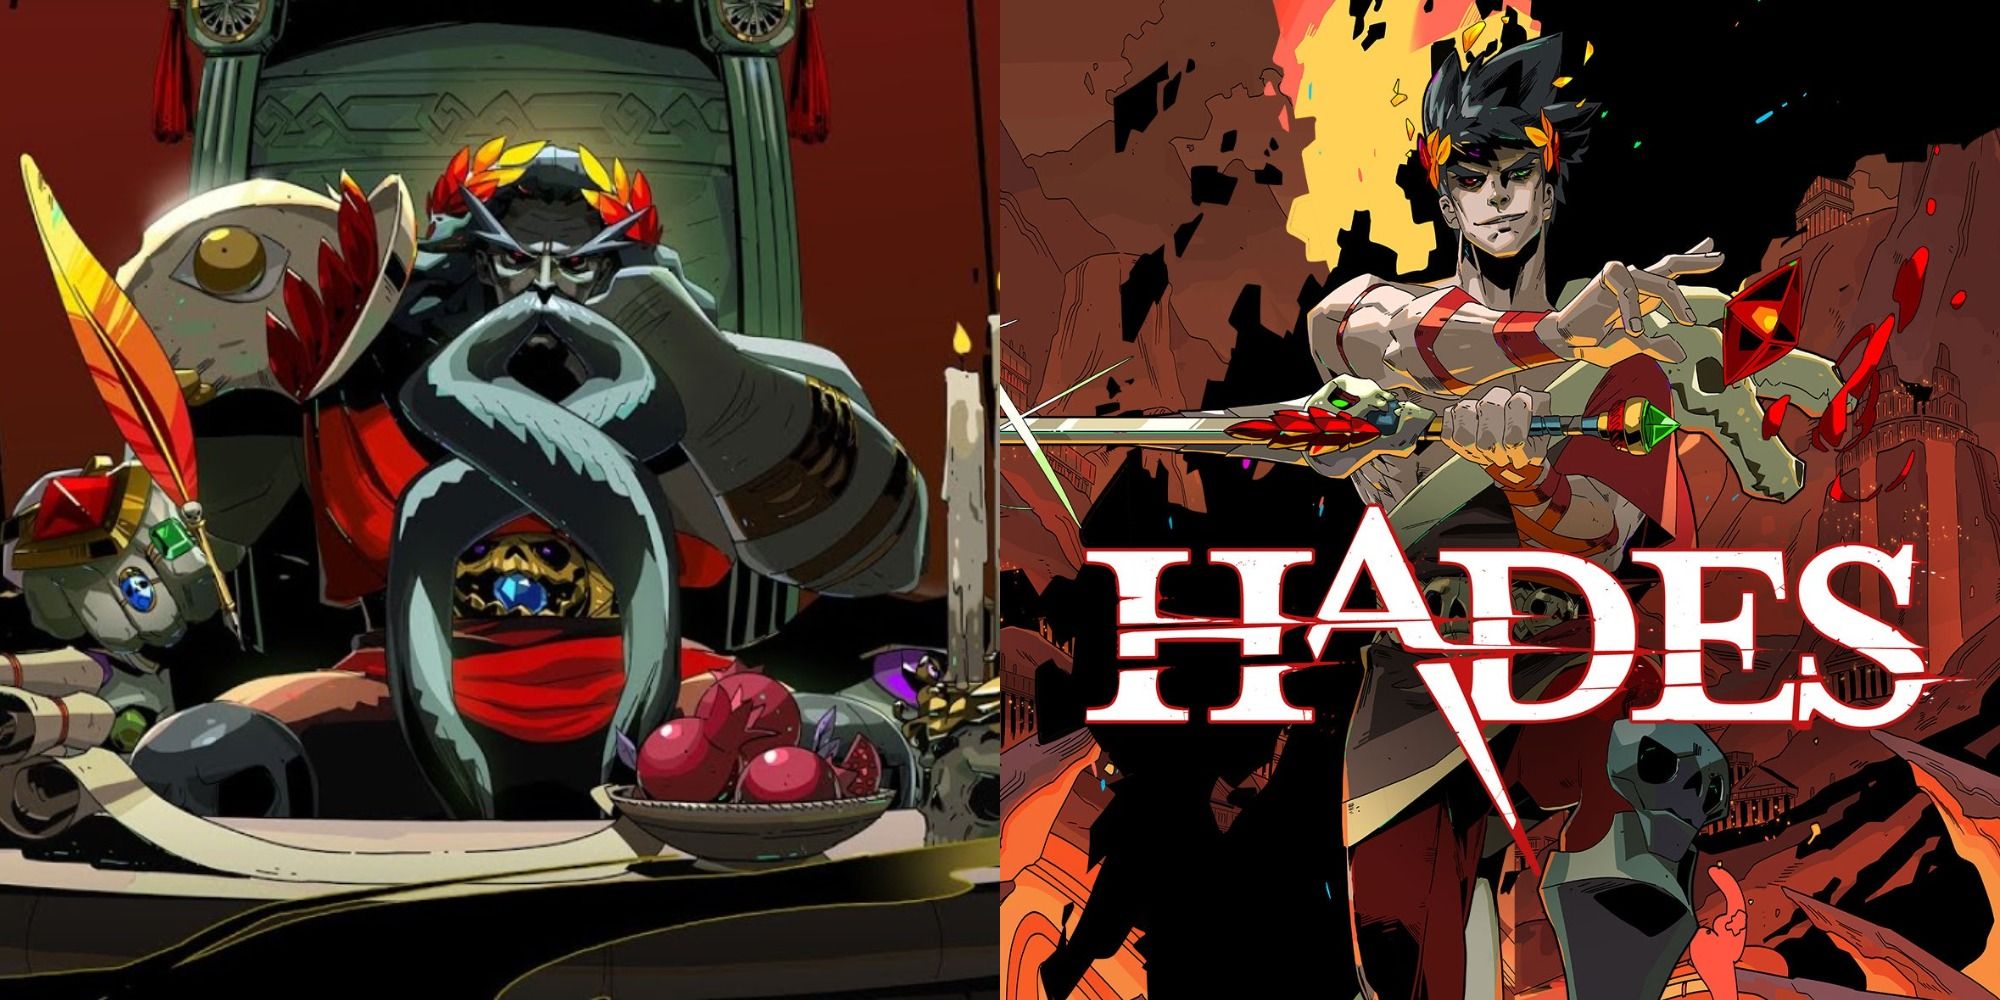 A split image of the God Hades working behind his desk and the game's front cover.